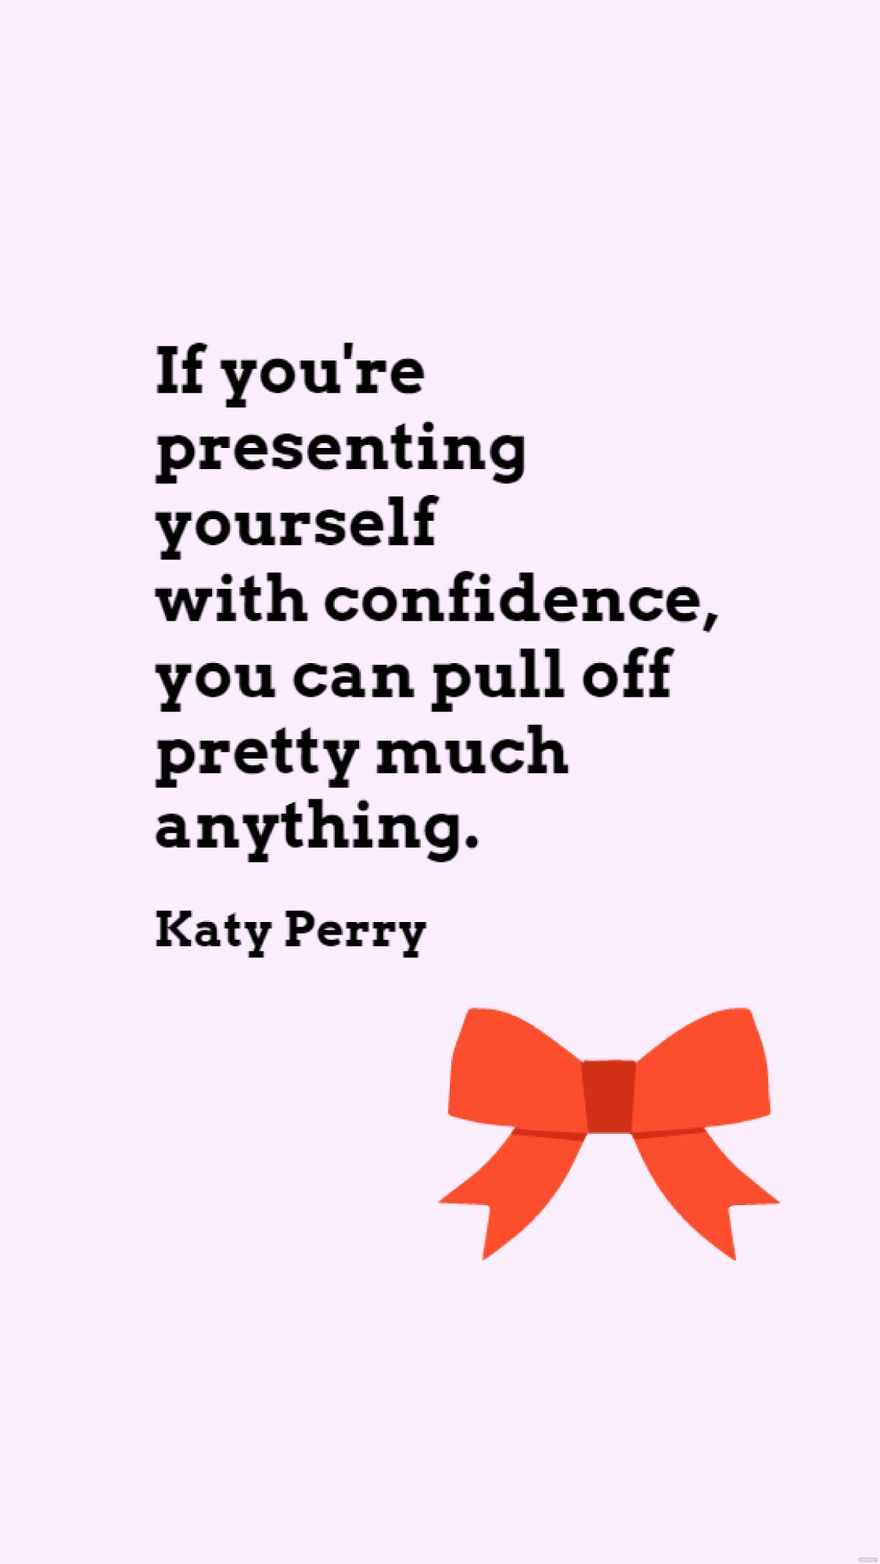 Free Katy Perry - If you're presenting yourself with confidence, you can pull off pretty much anything. in JPG